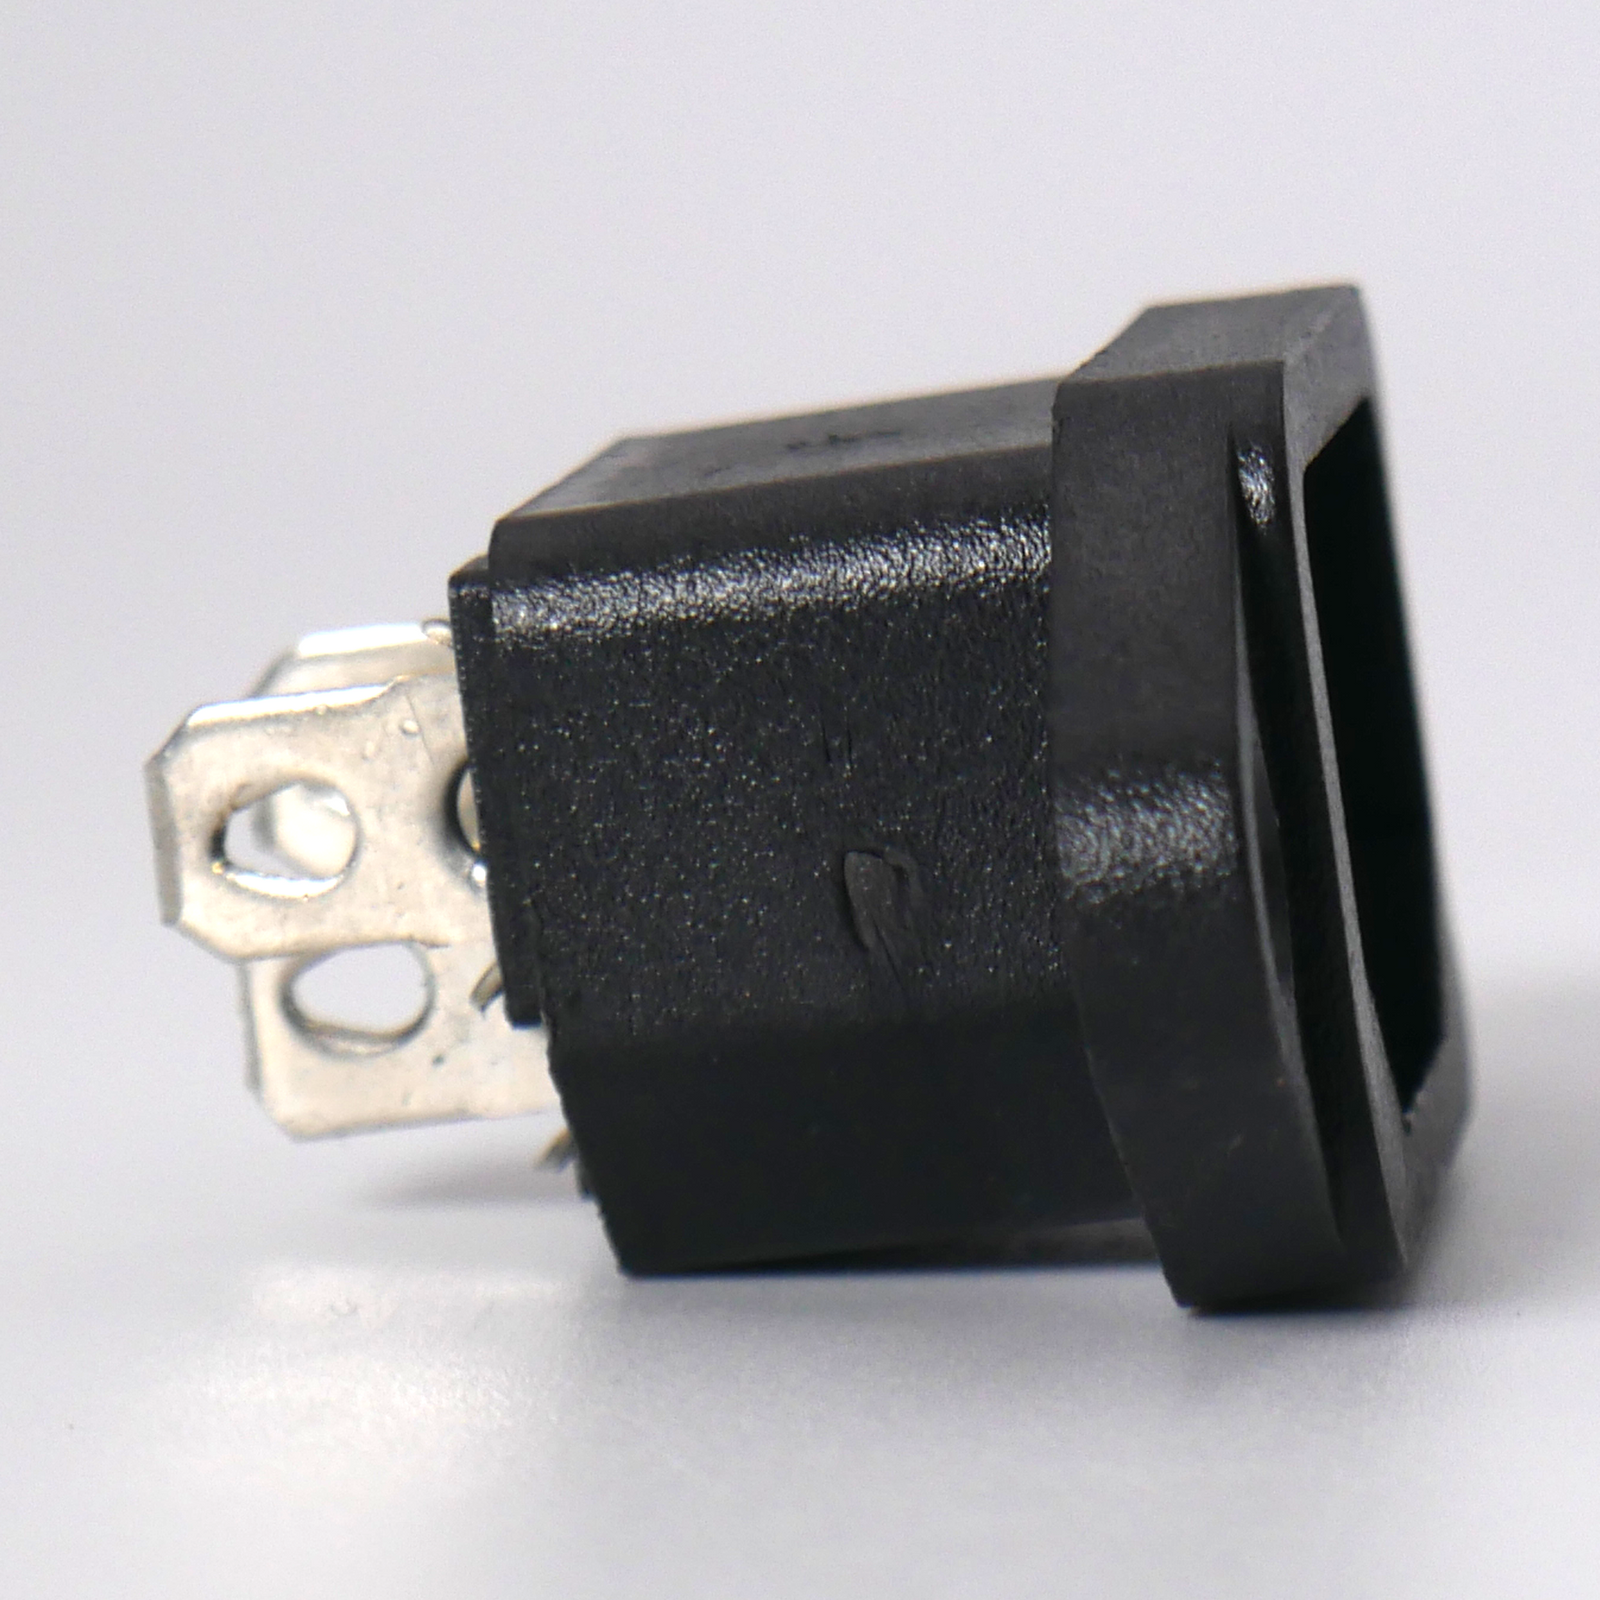 Power Receptacle replacement part for continuous band sealers